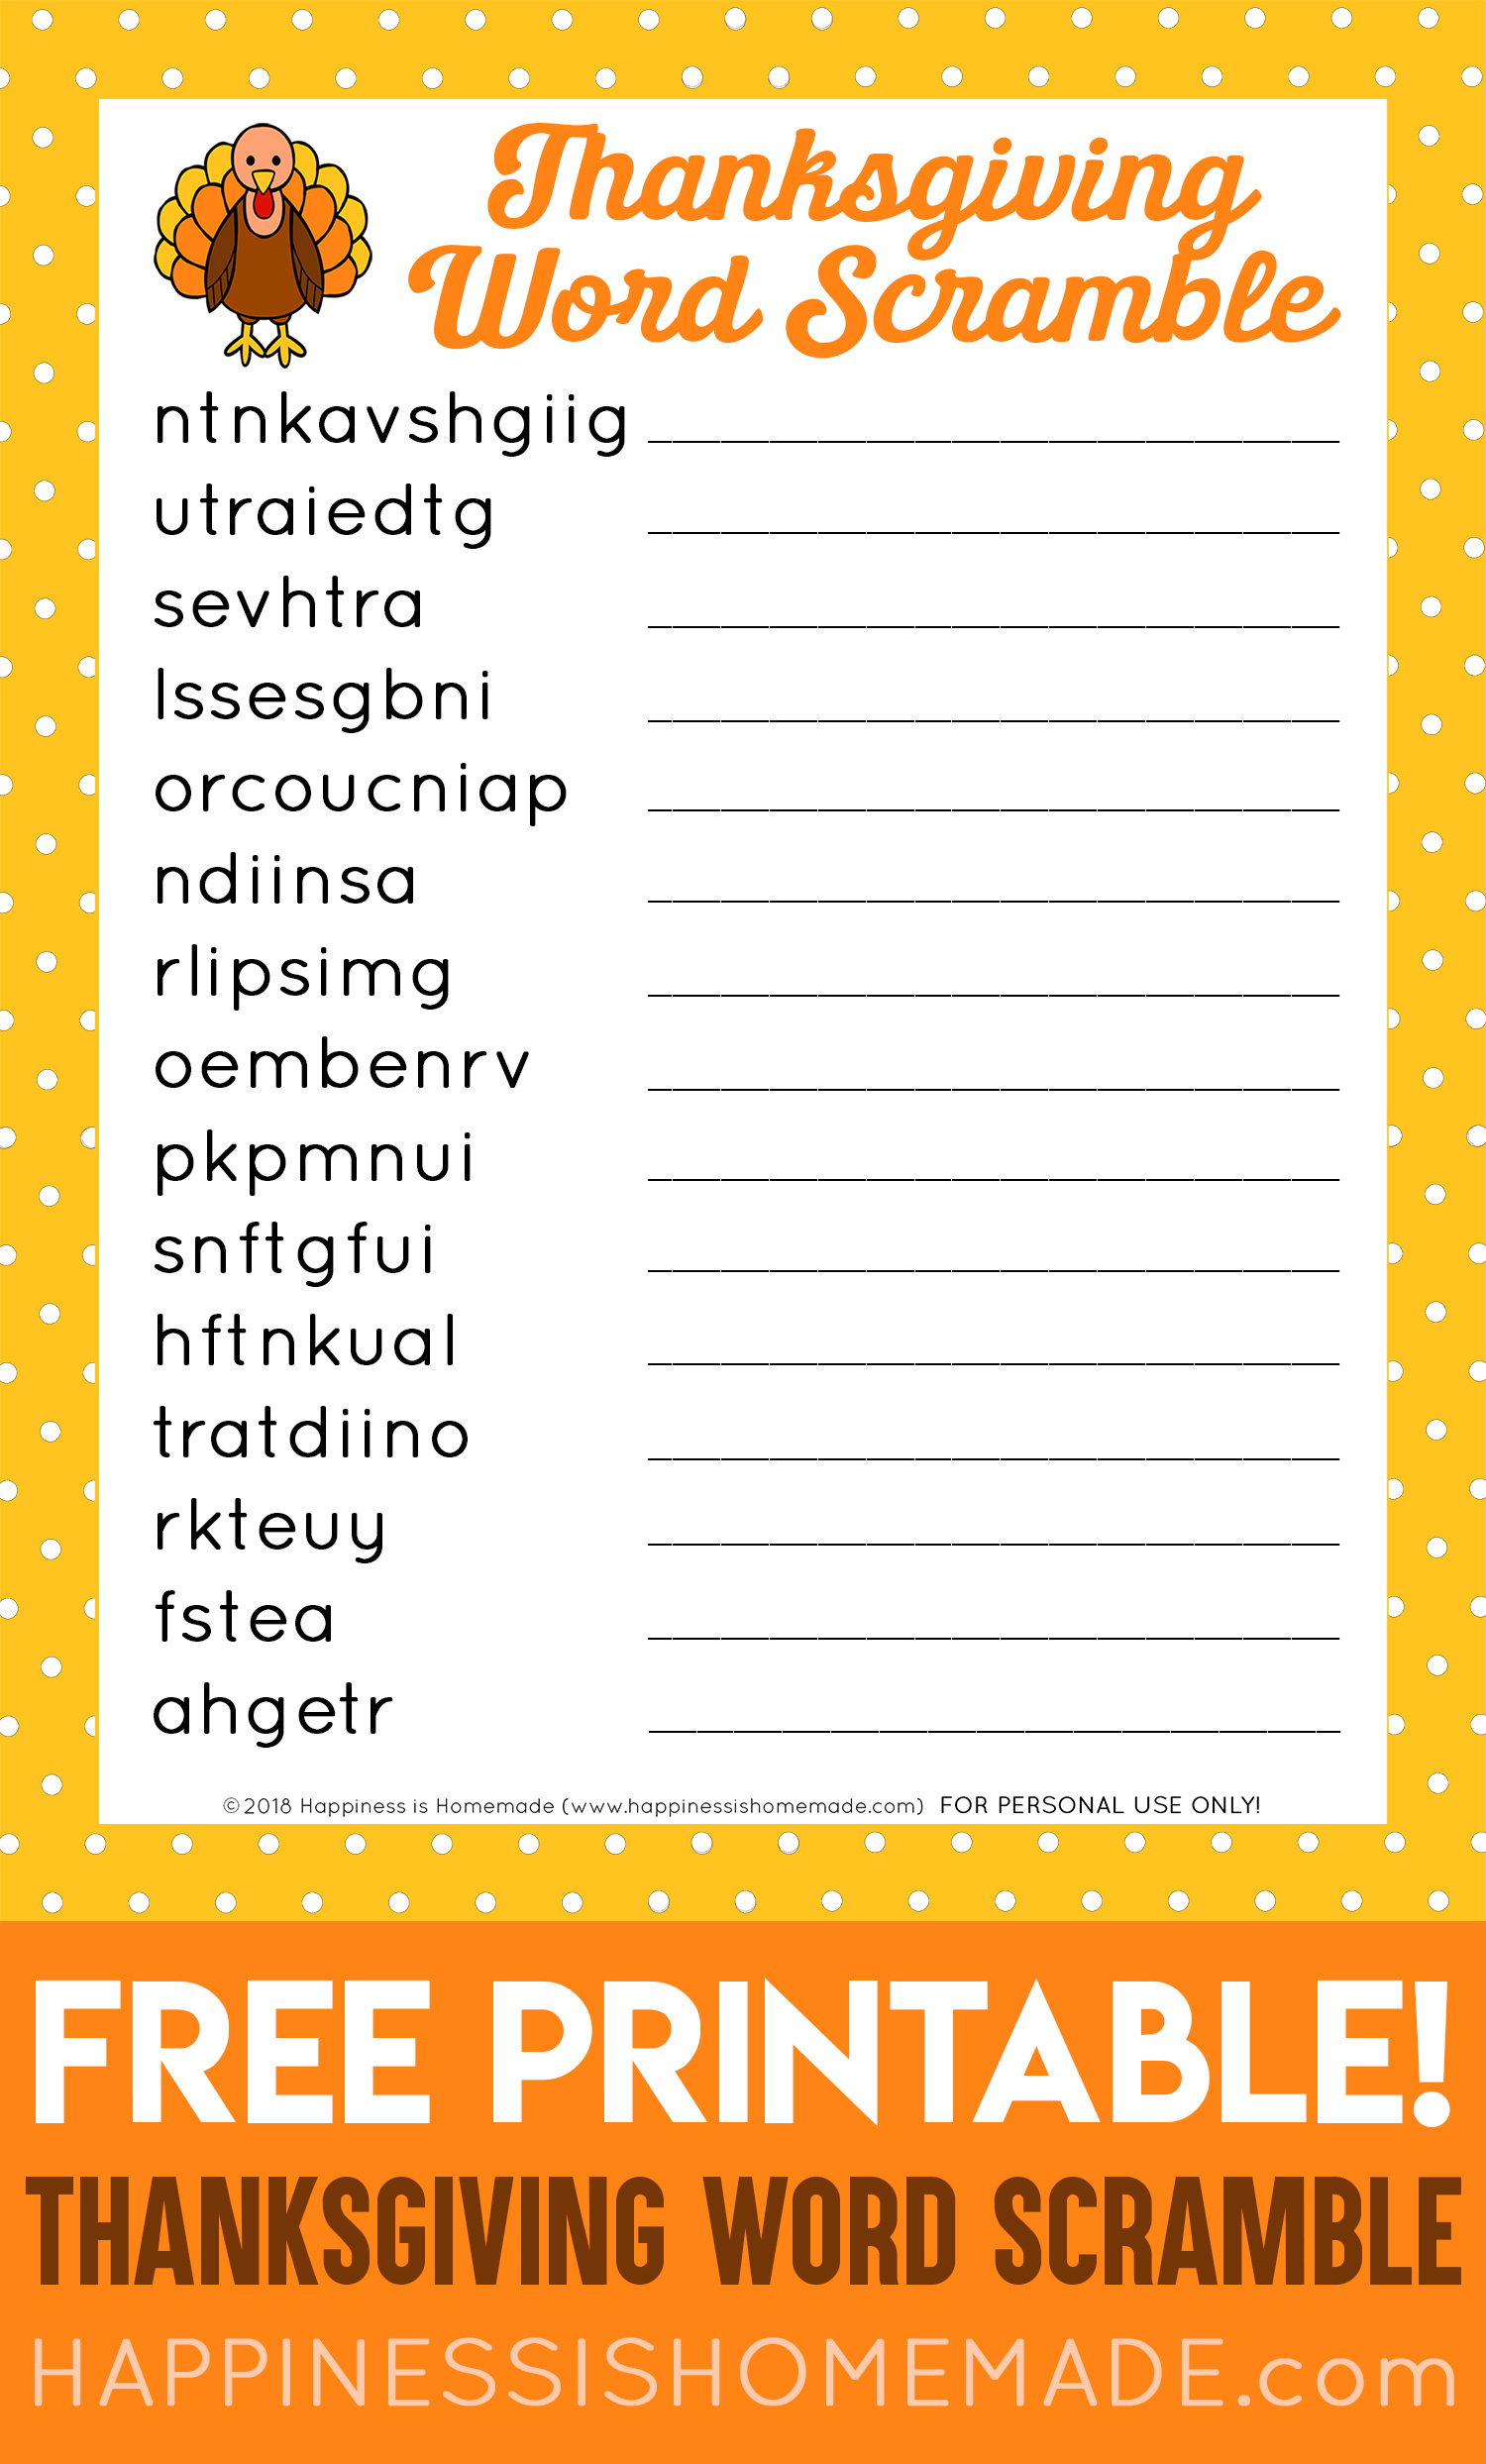 Free Printable Thanksgiving Word Scramble With Answers